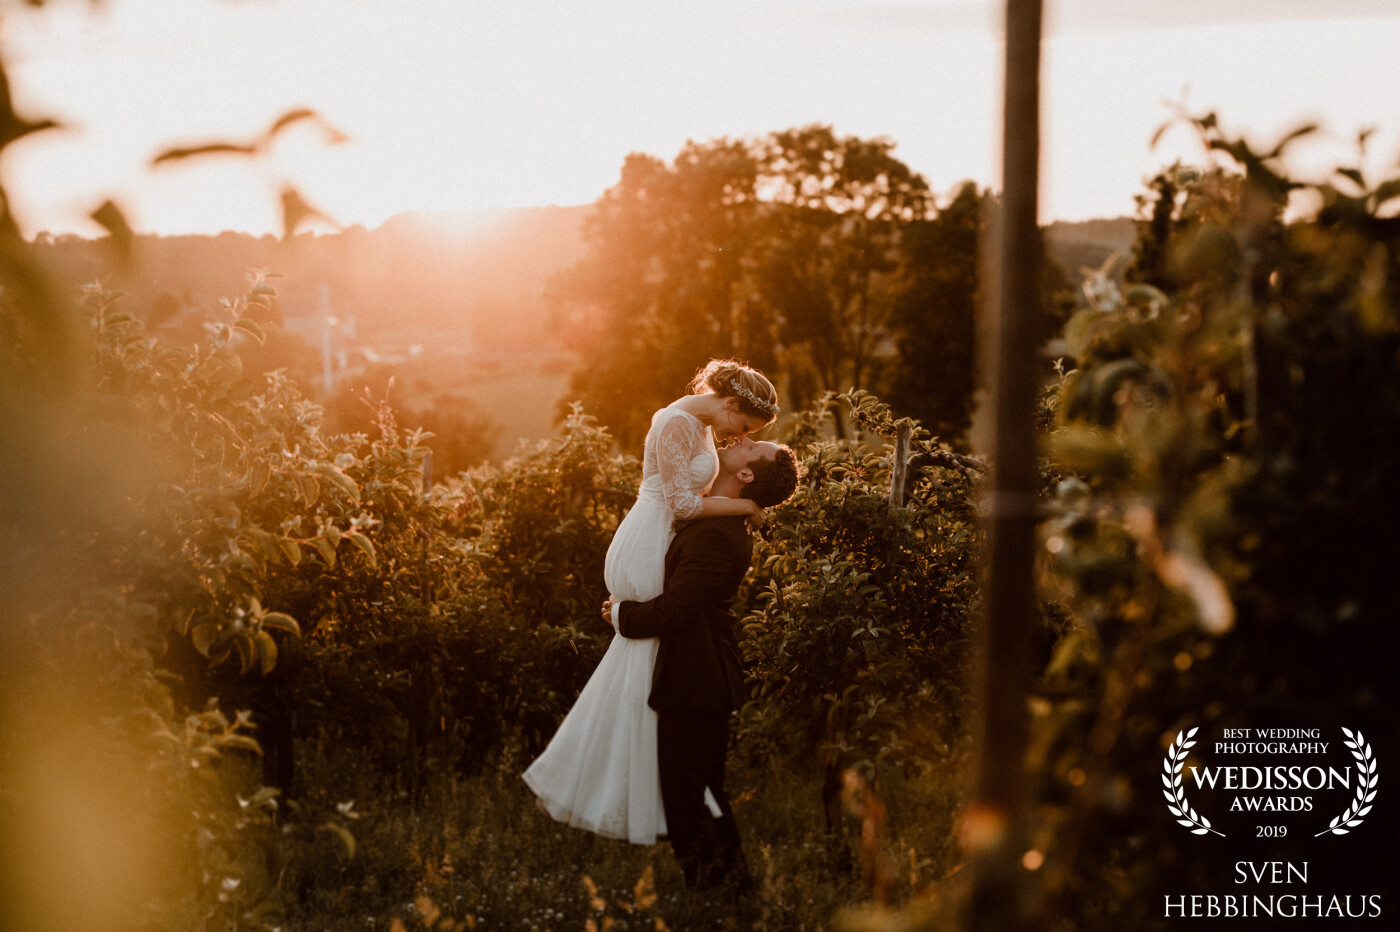 A wonderful wedding in Belgium. For the bridal pair shoot, we drove to the adjacent area which was full of apple trees. The sunset was fantastic and the moment unique. Thanks to my couples for all these beautiful moments.